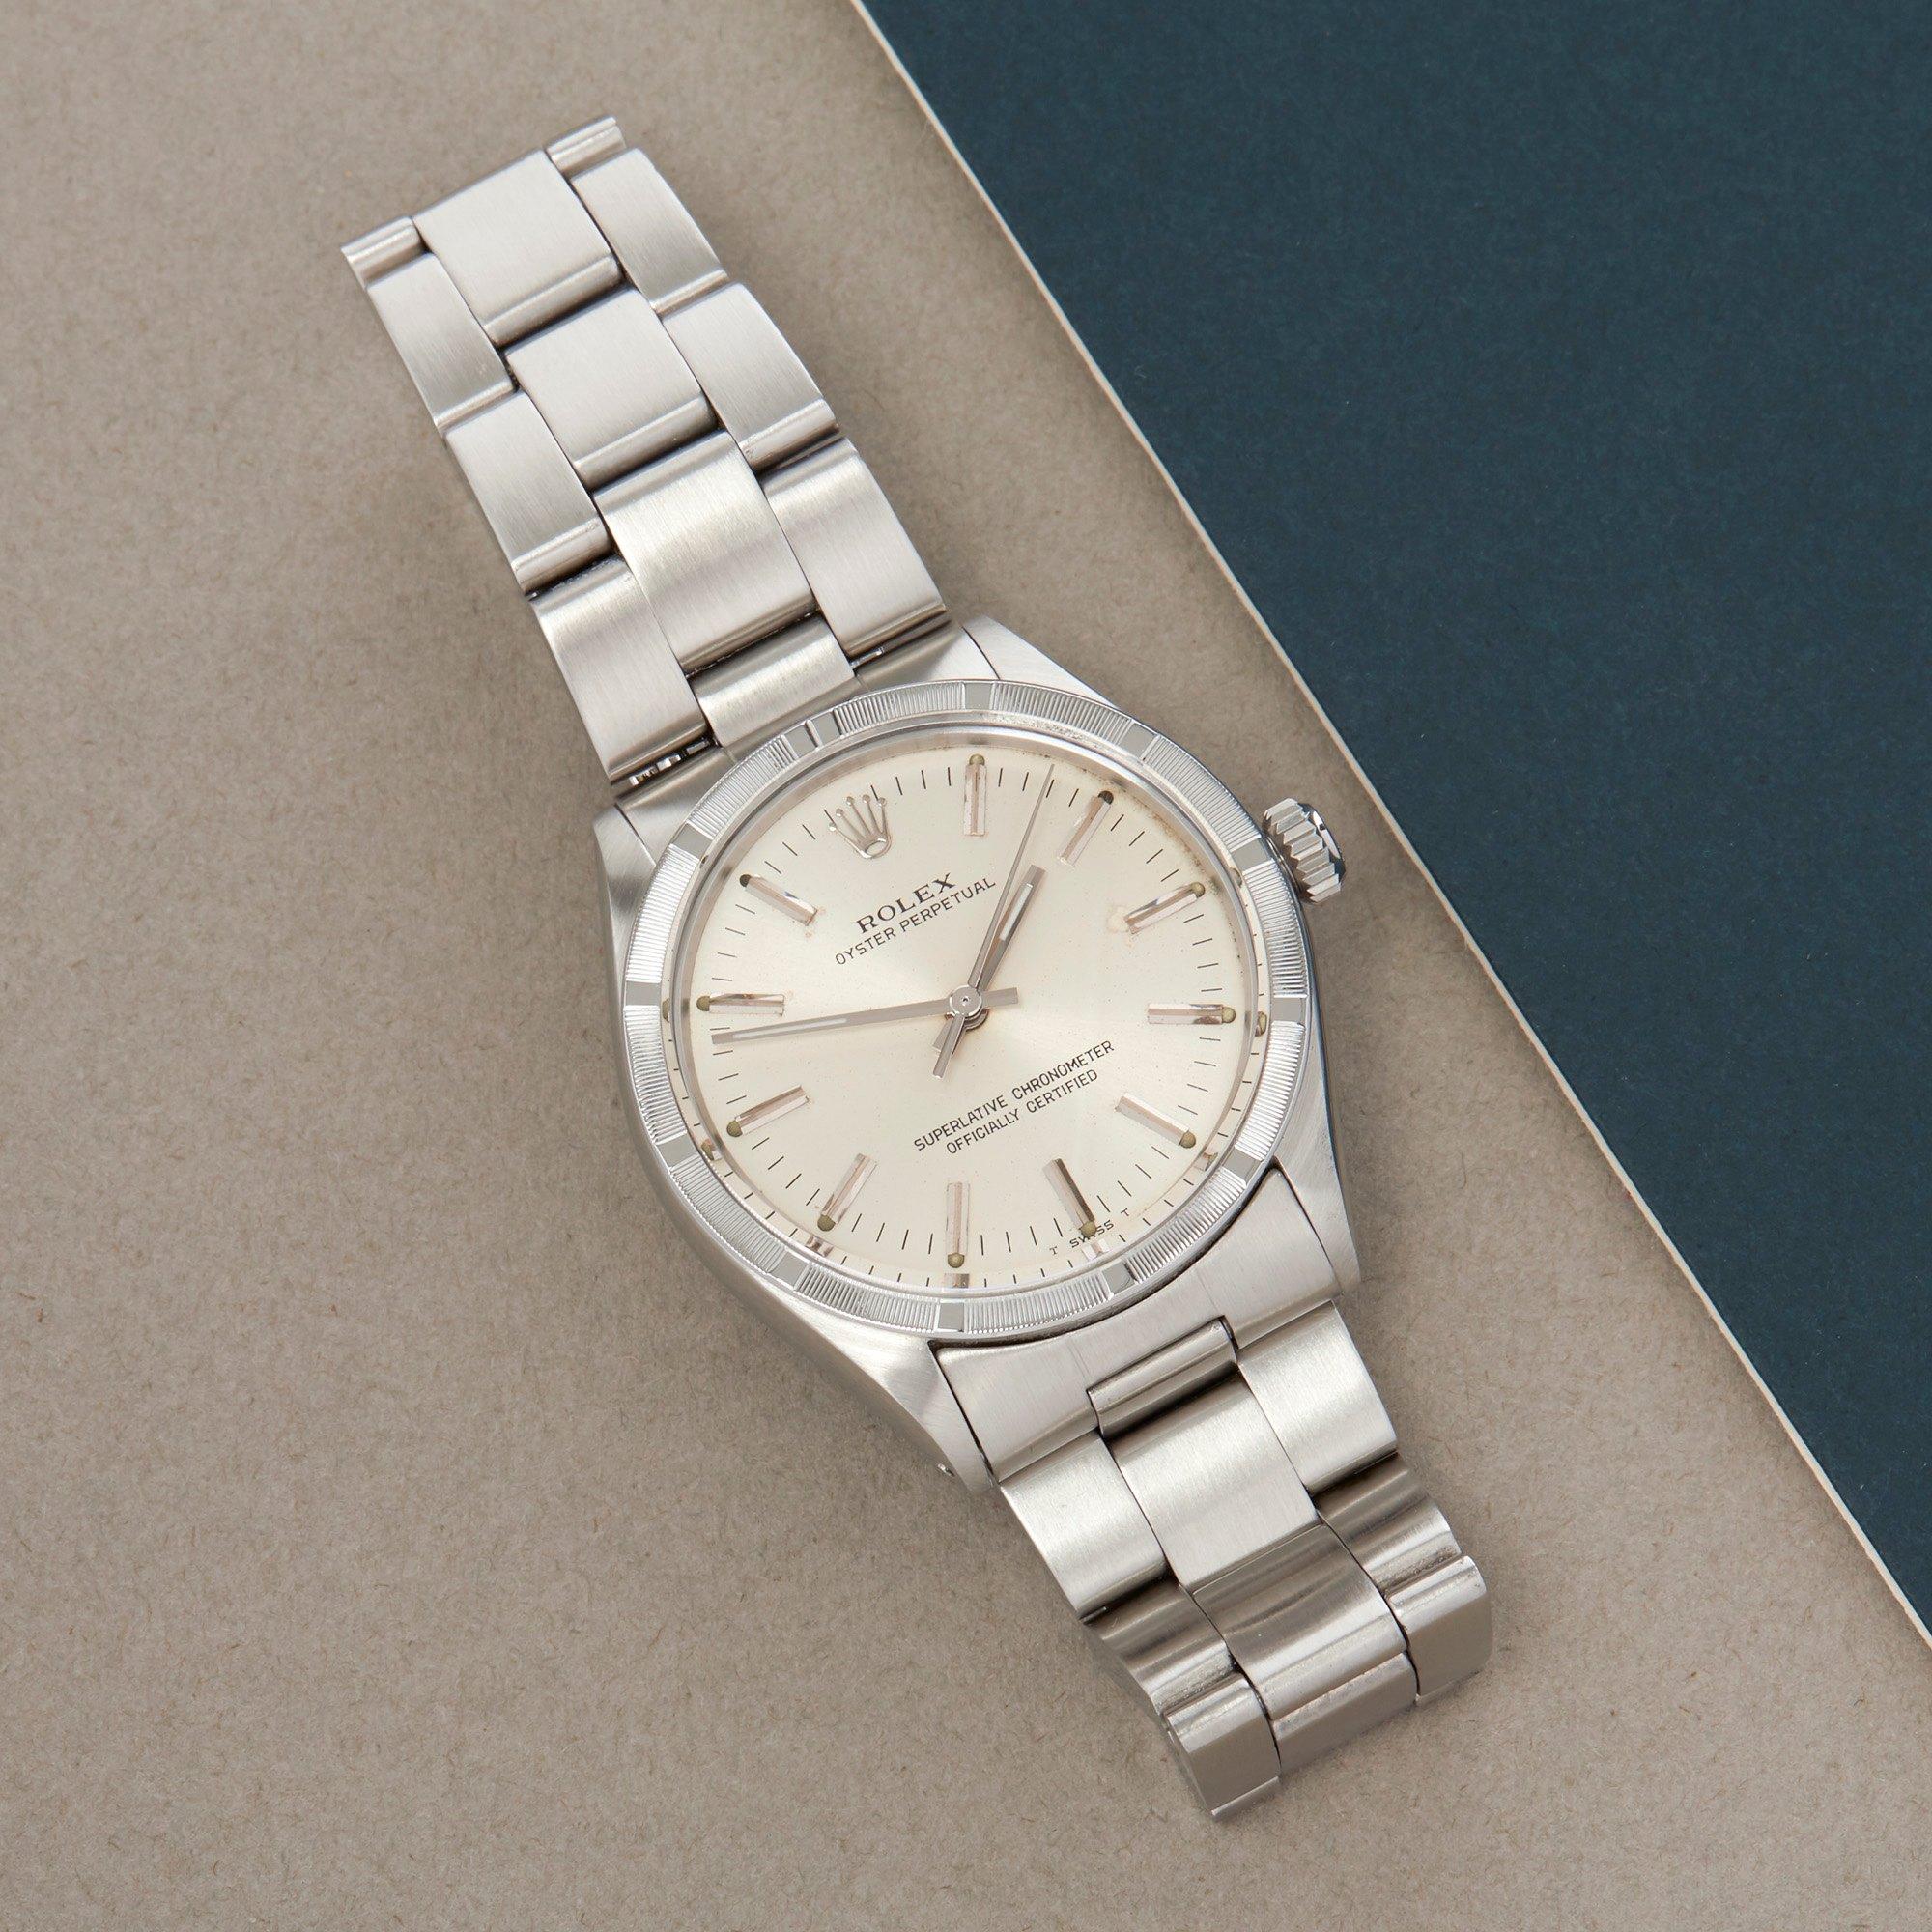 Xupes Reference: W007580
Manufacturer: Rolex
Model: Oyster Perpetual
Model Variant: 34
Model Number: 1007
Age: 1973
Gender: Unisex
Complete With: Rolex Service Pouch 
Dial: Silver Baton
Glass: Sapphire Crystal
Case Size: 34mm
Case Material: